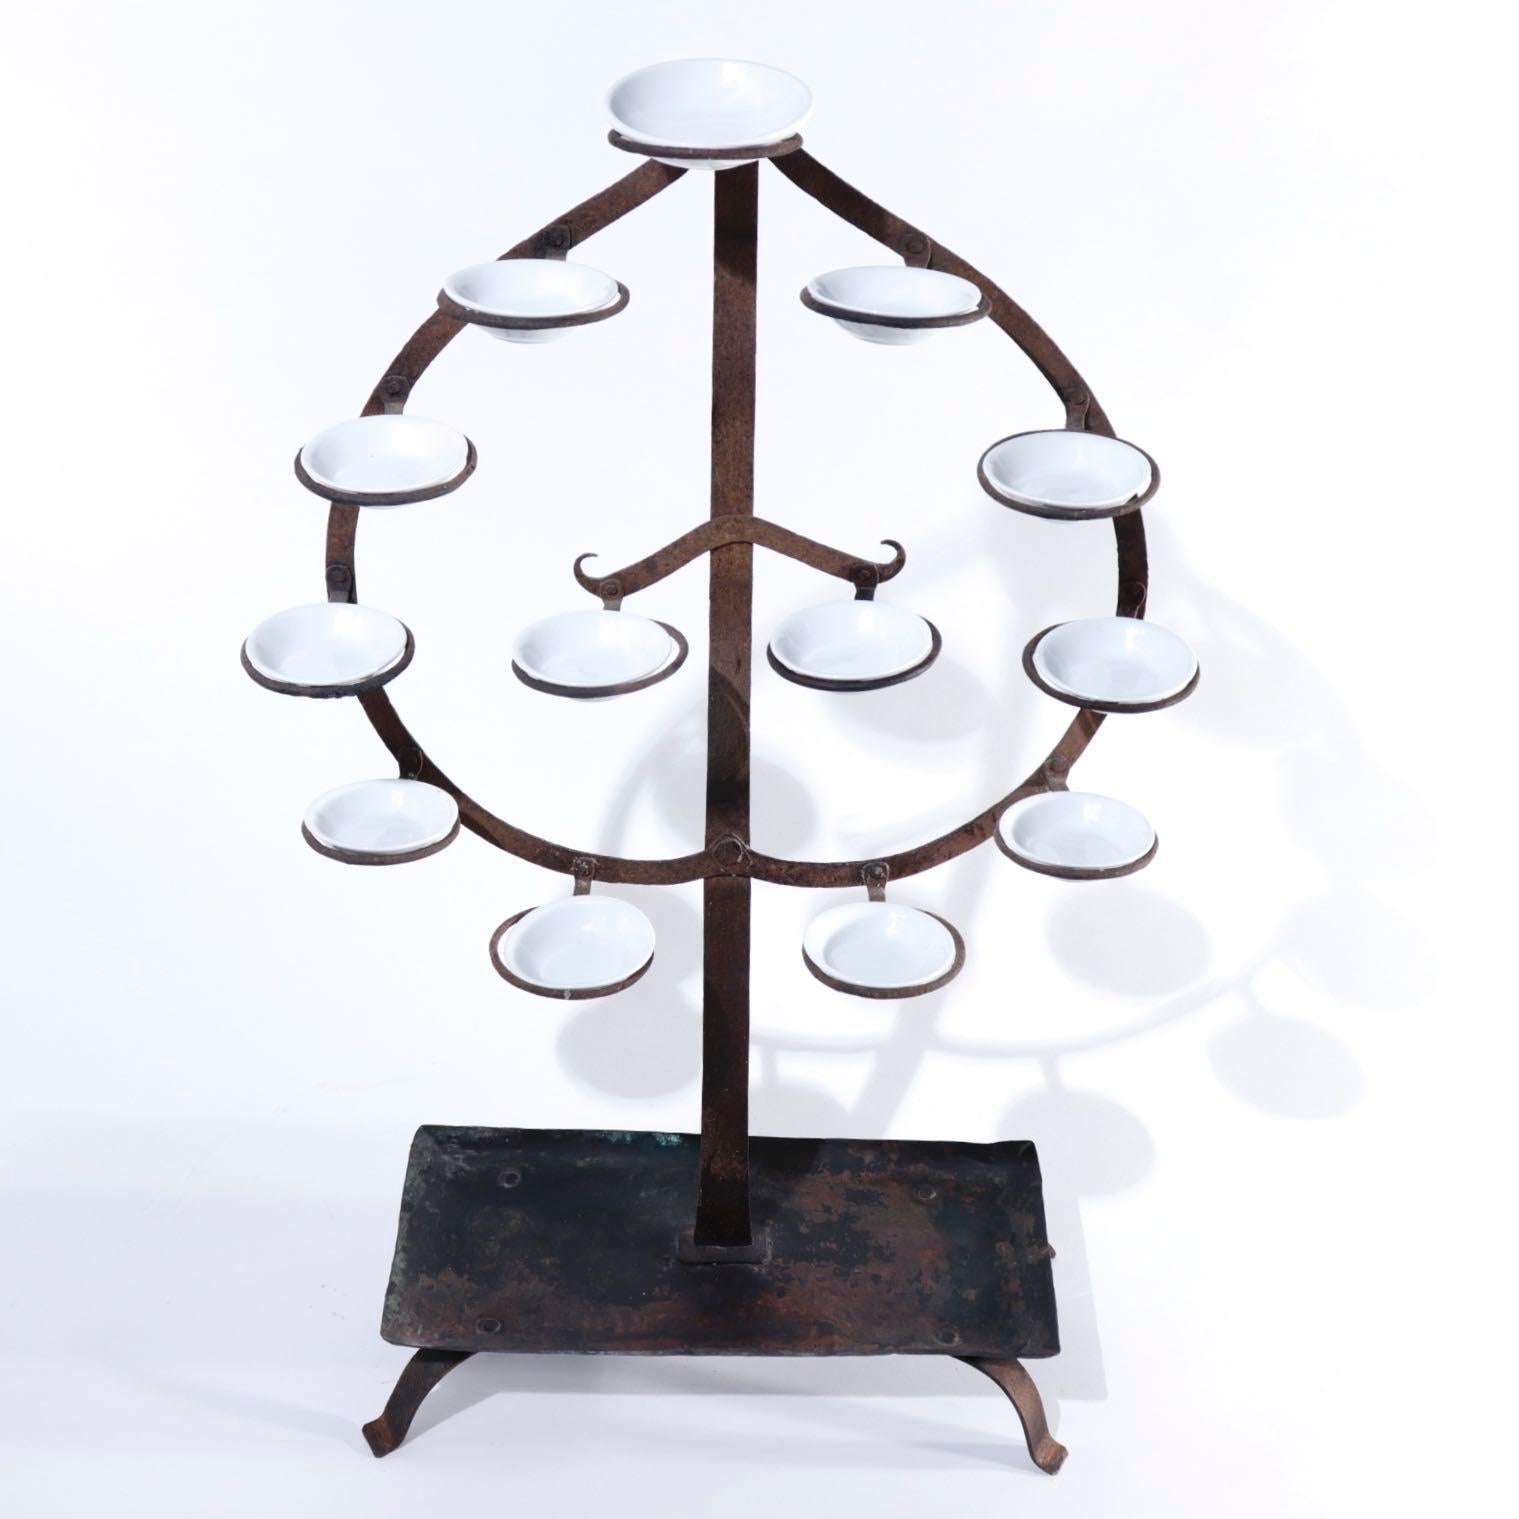 Japanese Tomyodai, a temple light stand created of iron and copper in the upright form of the Tama (Buddhist flaming jewel) with 13 ringlet projections to  hold ceramic oil dishes (replaced), a four legged base with copper pan base. Current day use